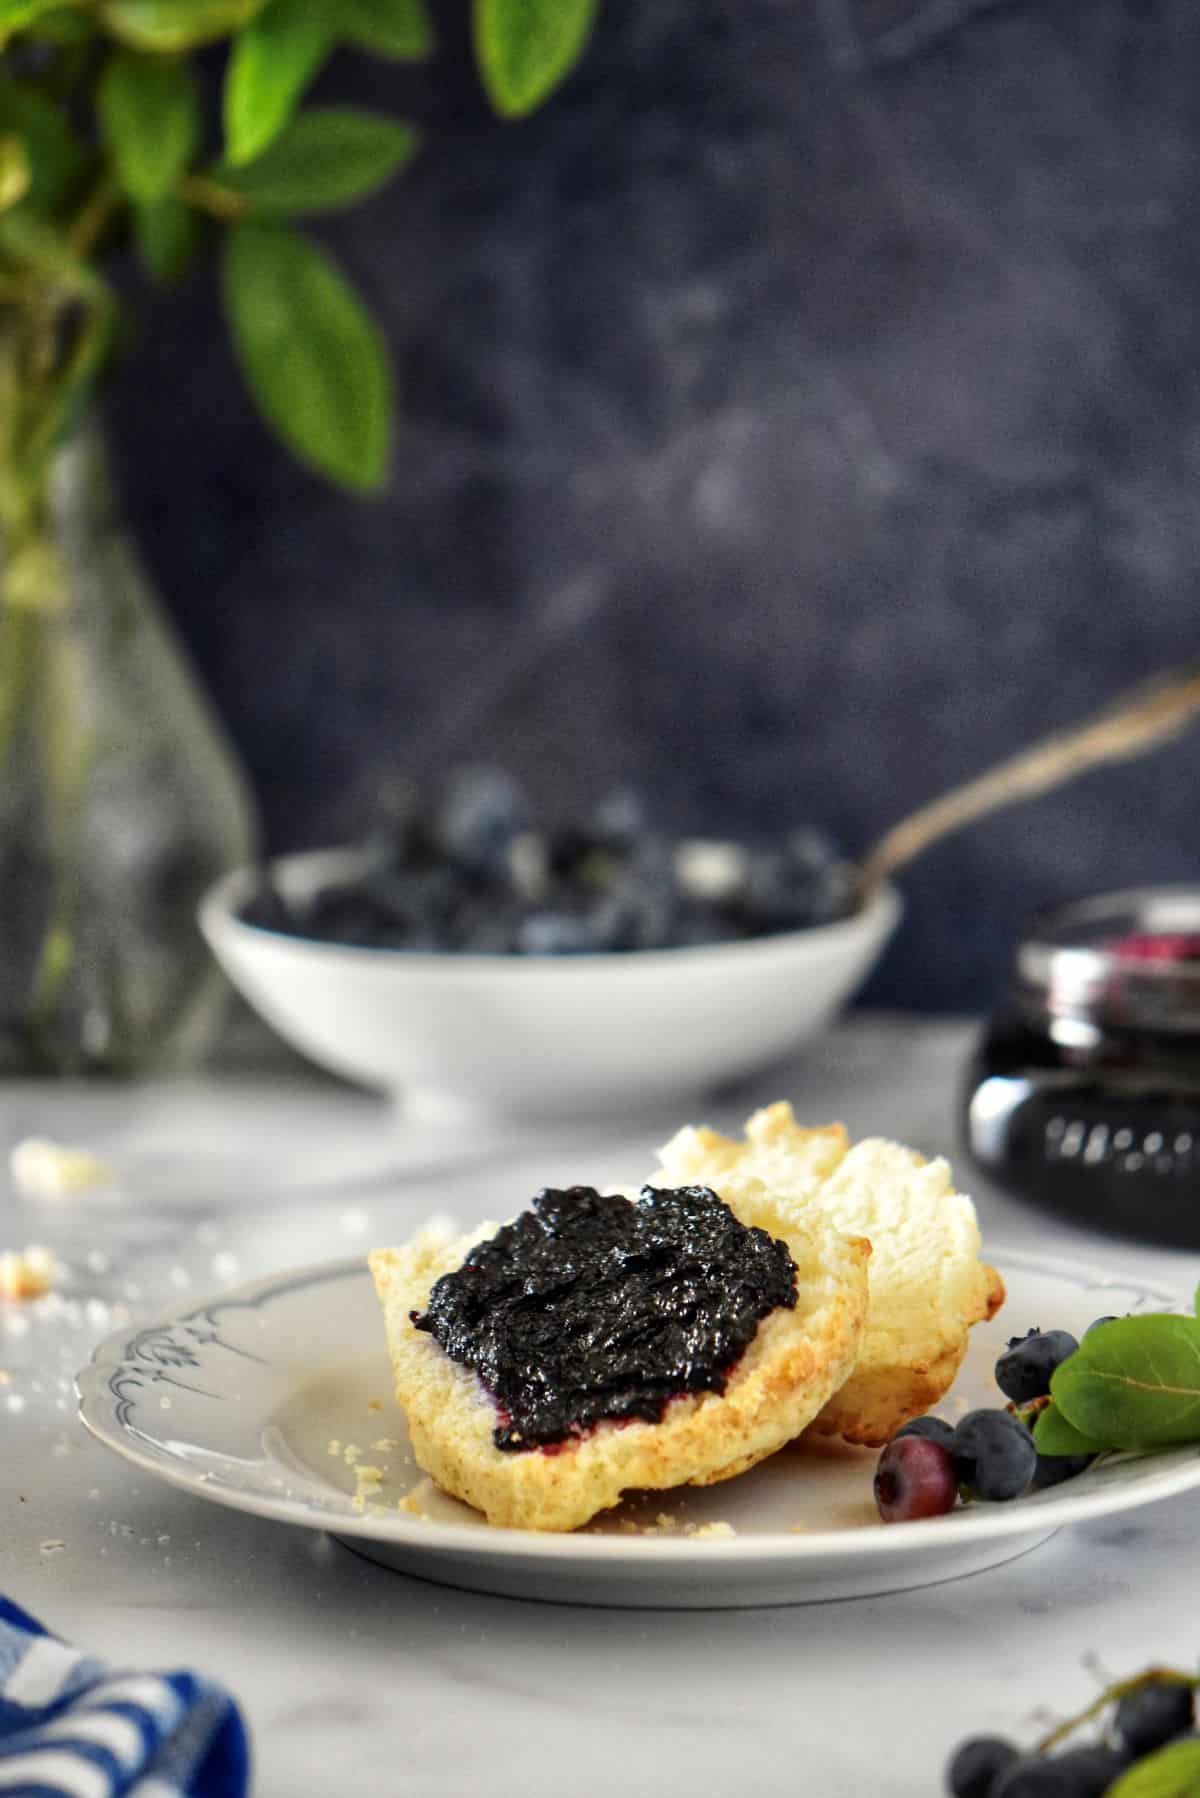 Blueberry jam on a buttermilk biscuit.